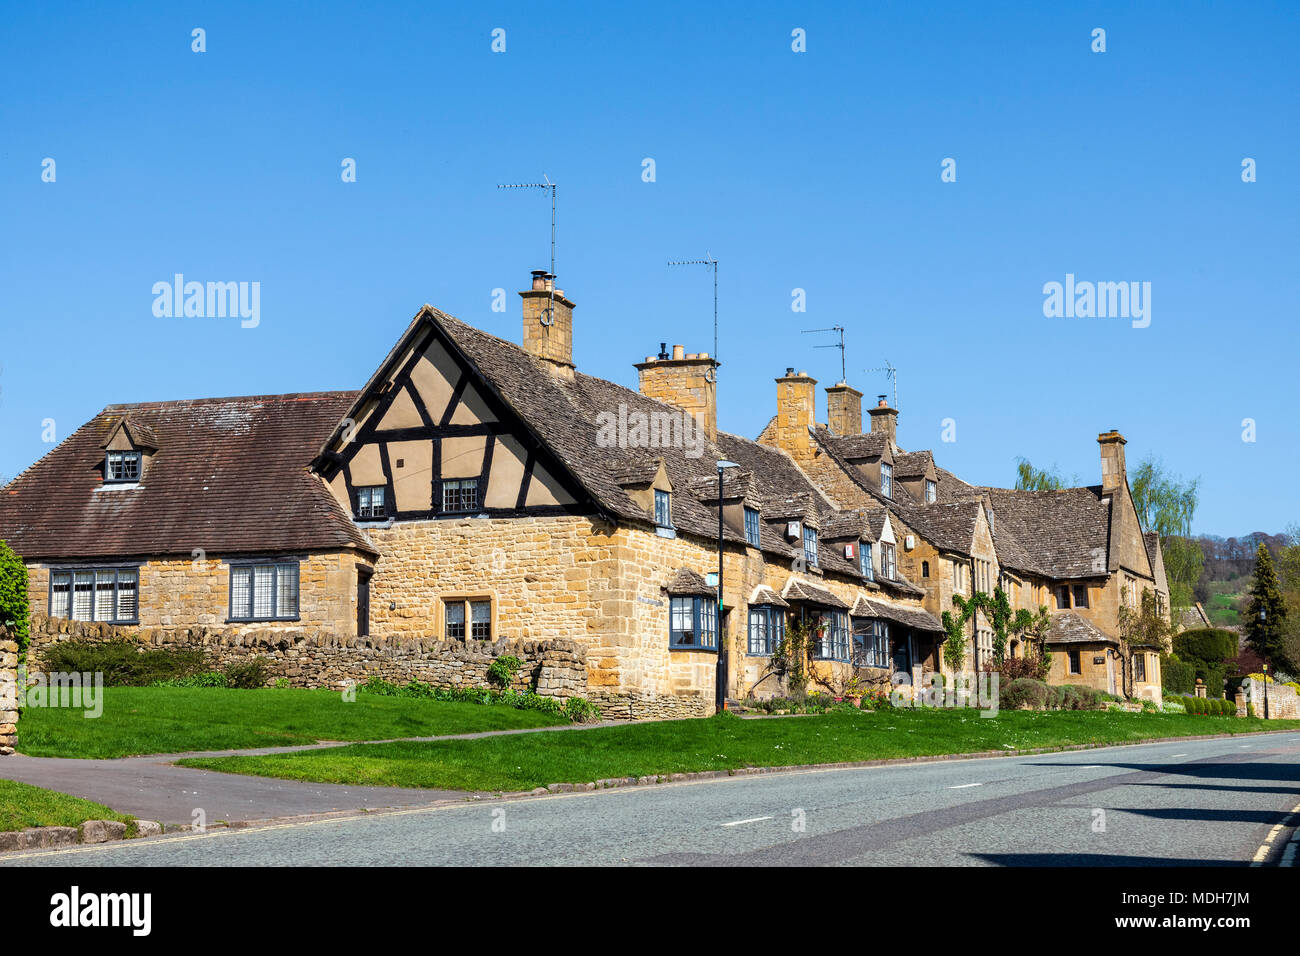 High Street, Broadway, Cotswolds on a sunny spring day with blue skies. Stock Photo